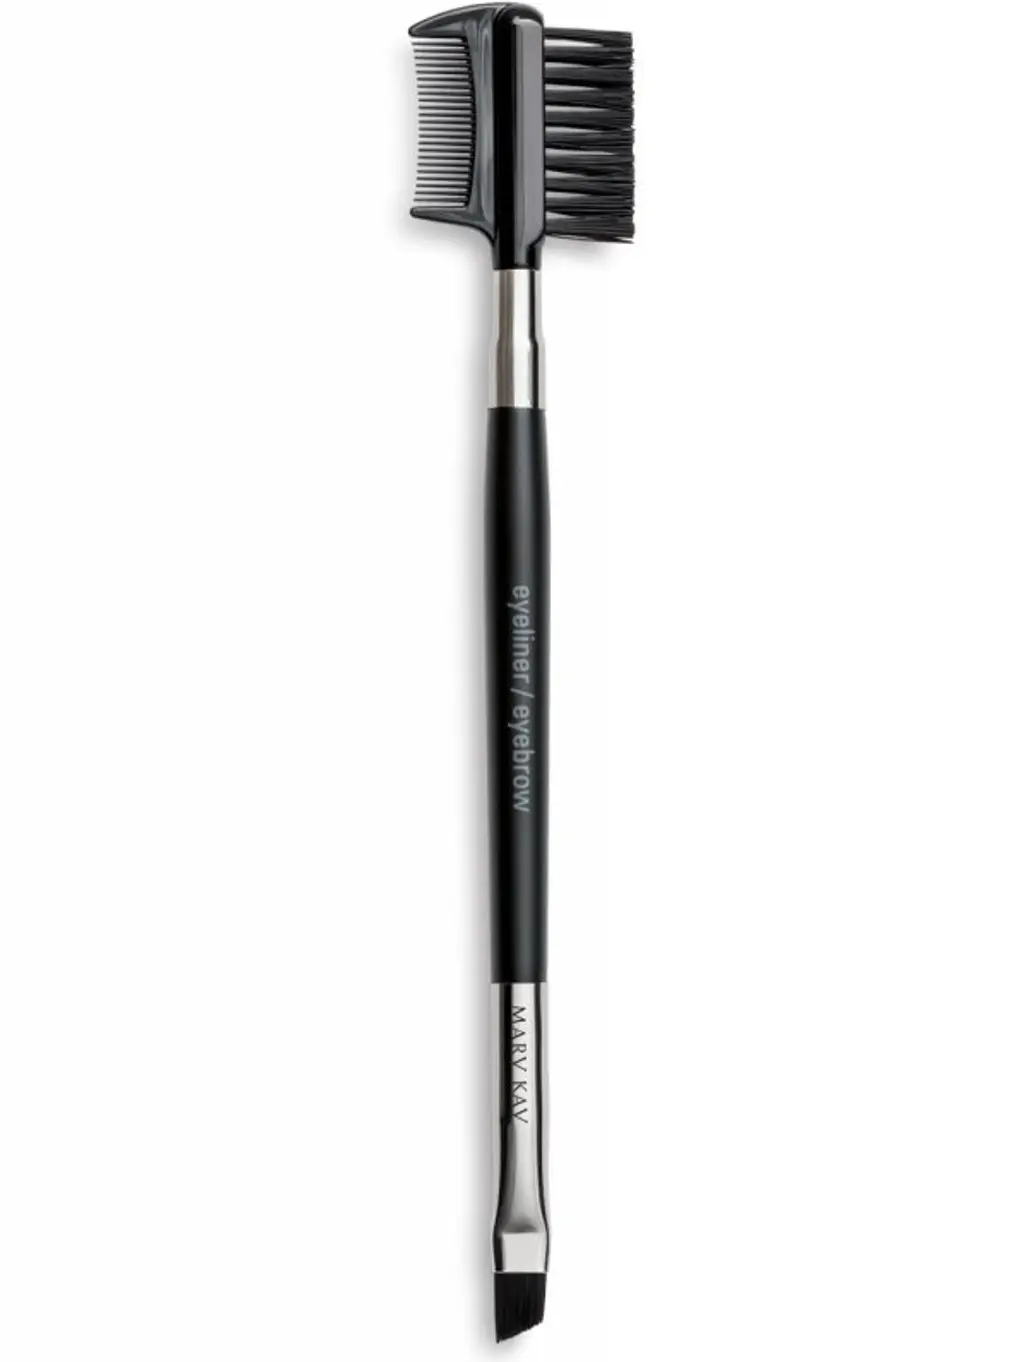 You’ve Got to Have a Good Brow Brush